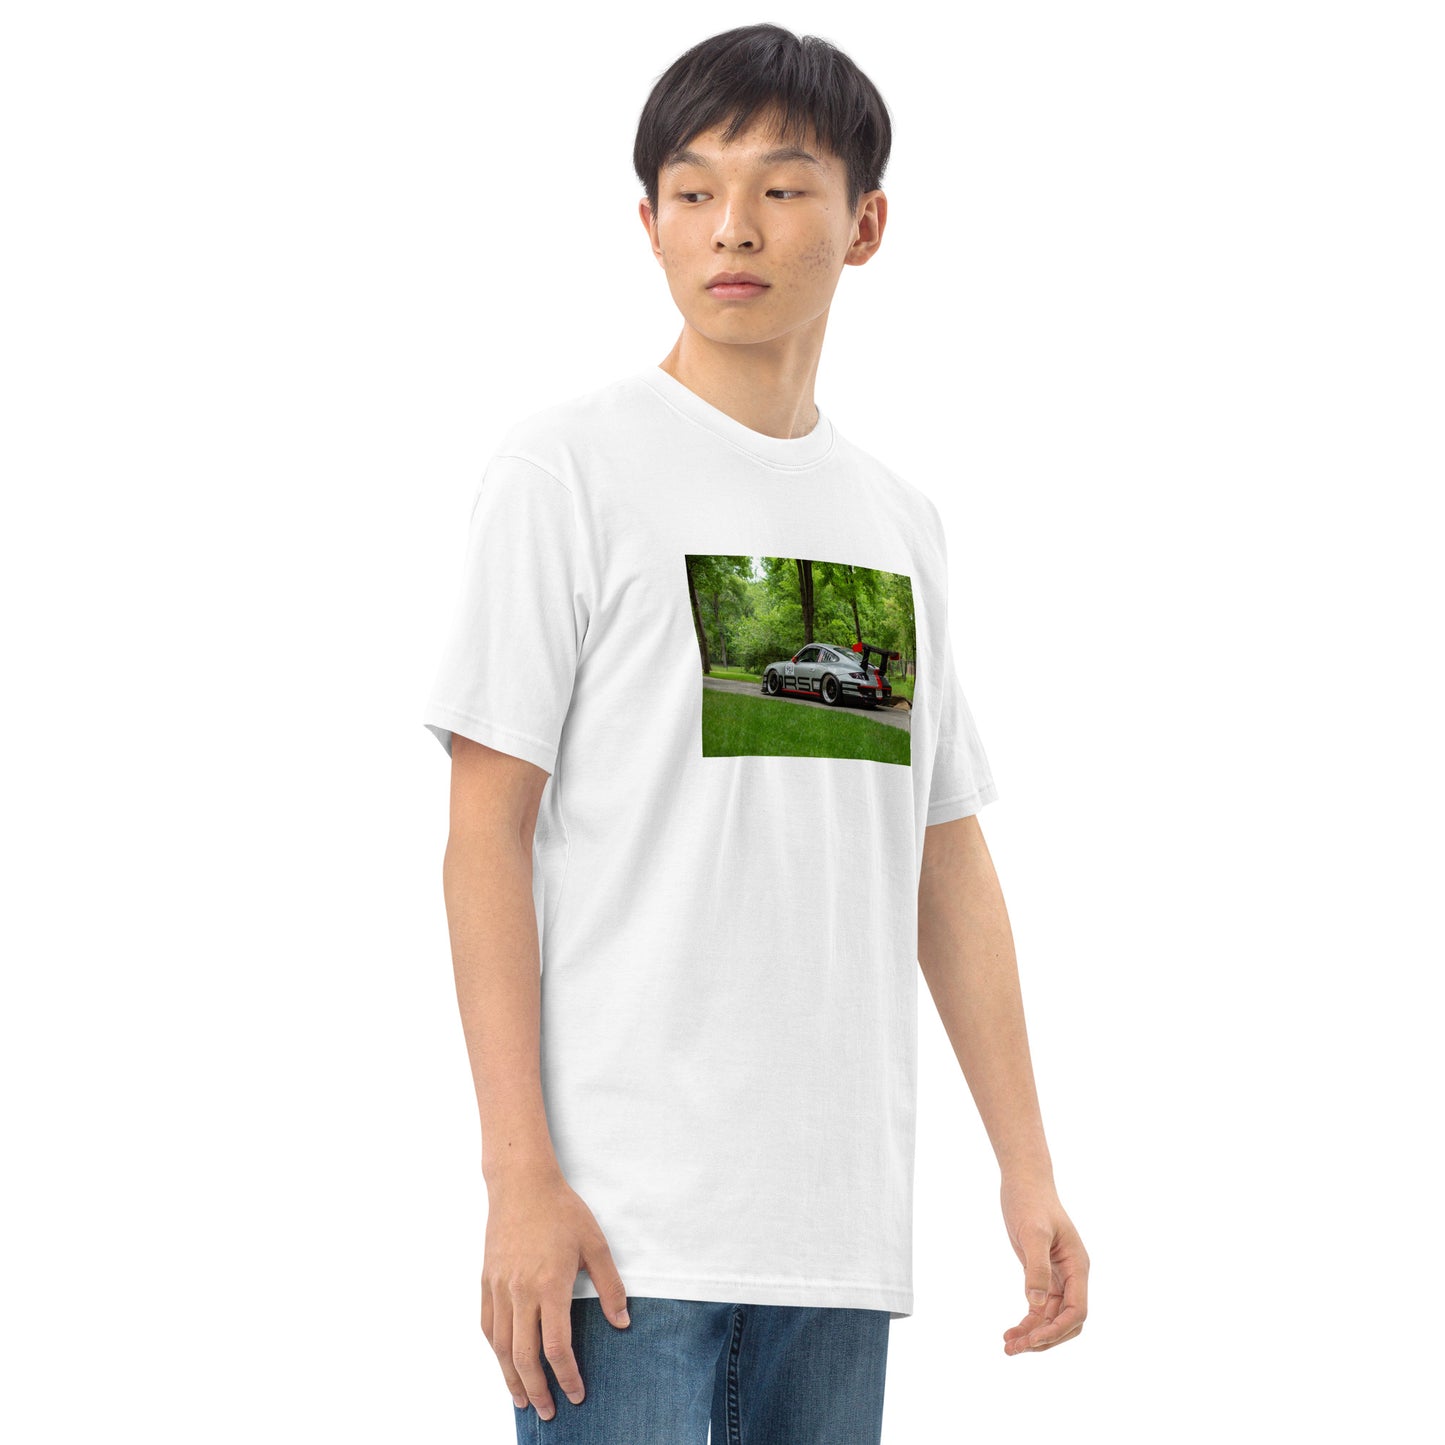 The Freddy Graphic Photo Tee